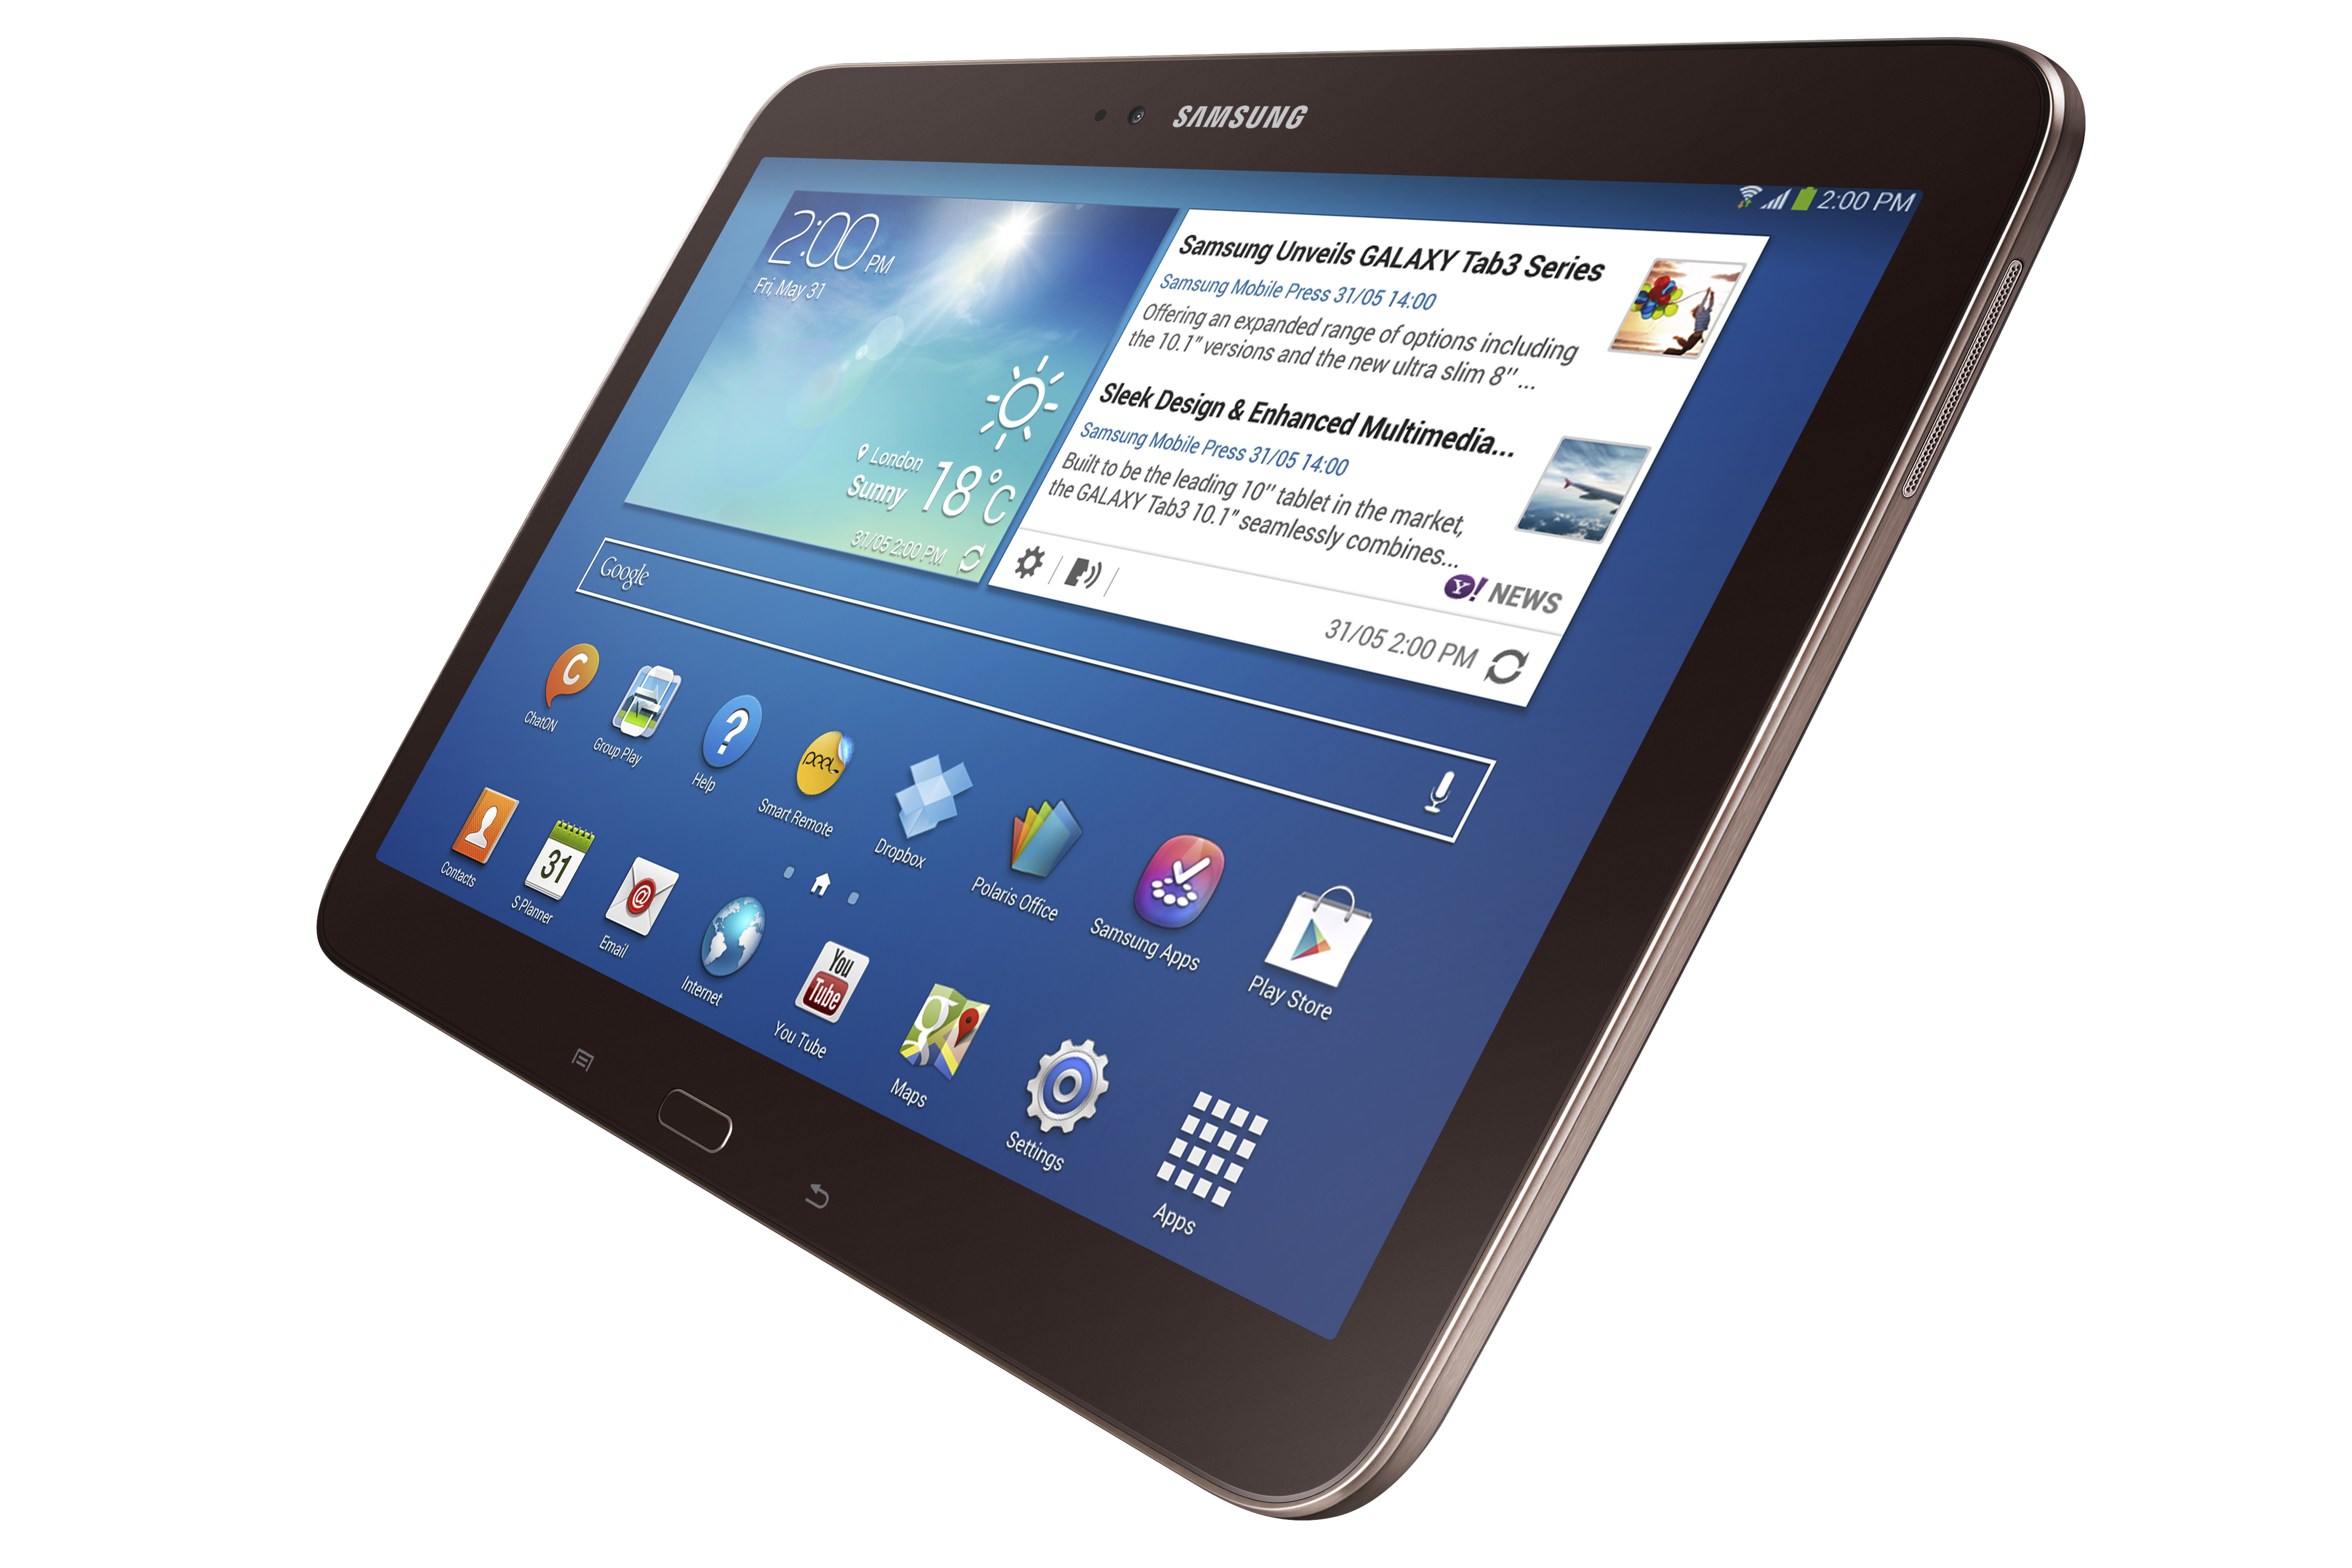 Samsung Galaxy Tab 3 10.1, and 7.0 Coming To The U.S. July 7 $399, $299 And $199 | TechCrunch